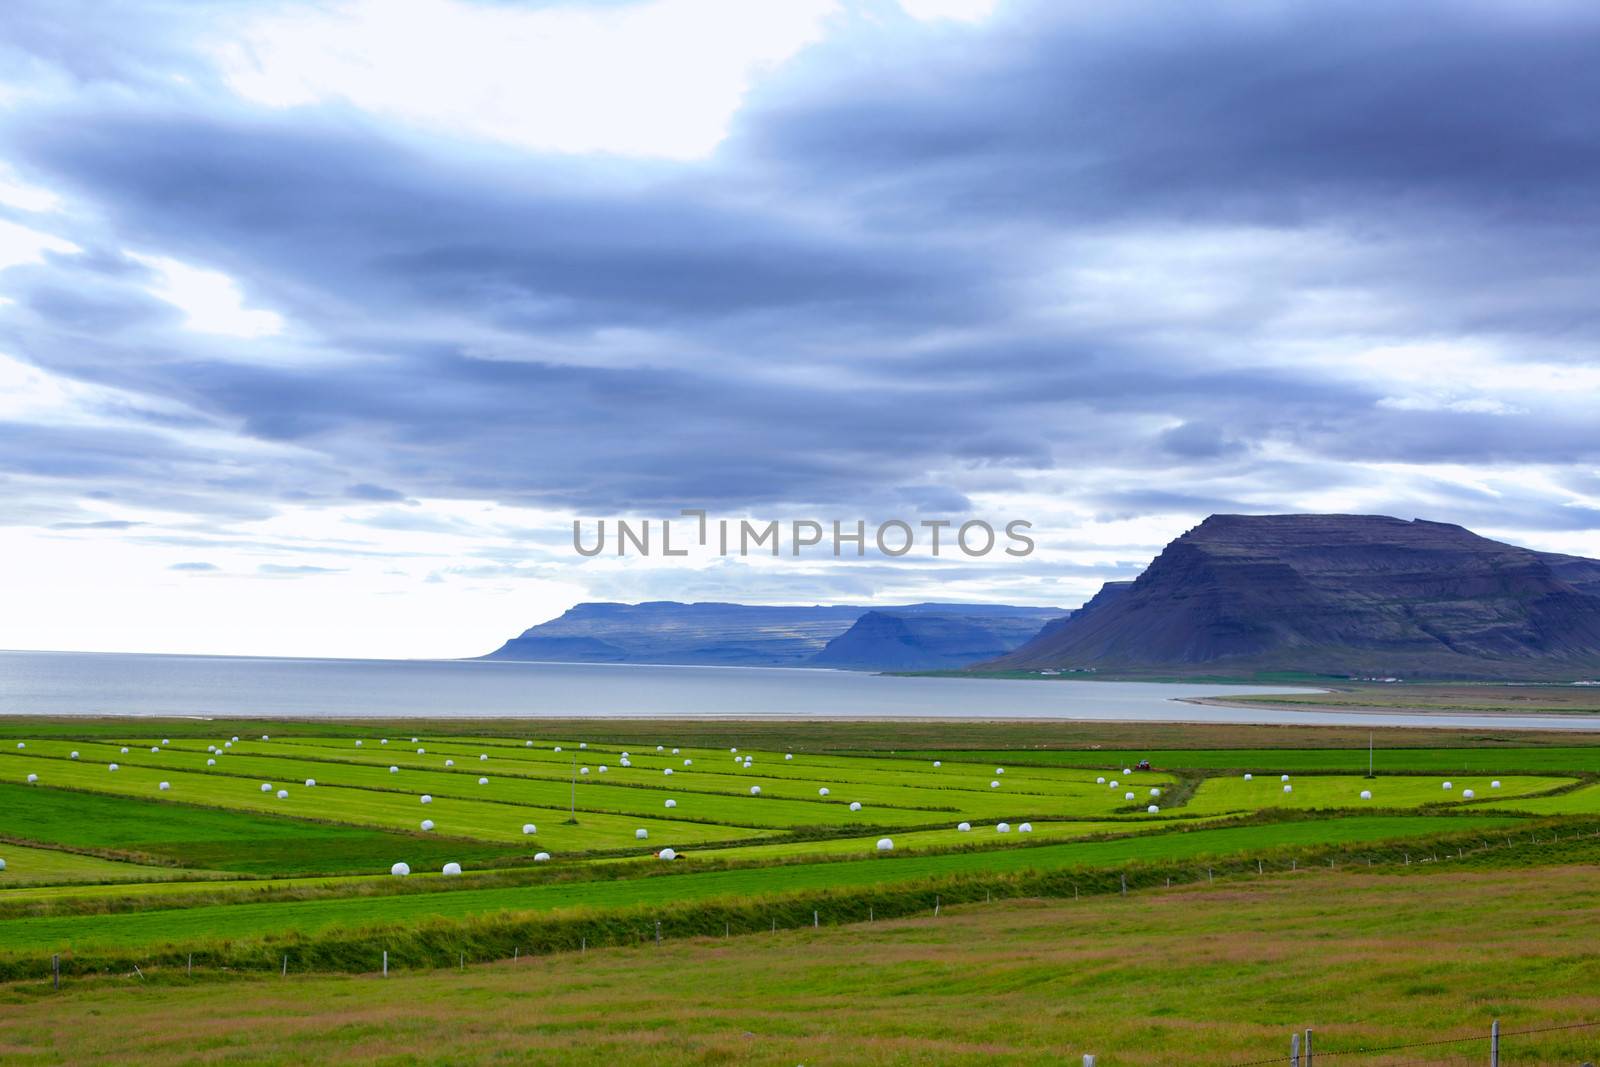 Icelandic Rural Landscape. Hay bales in white plastic on the meadow.